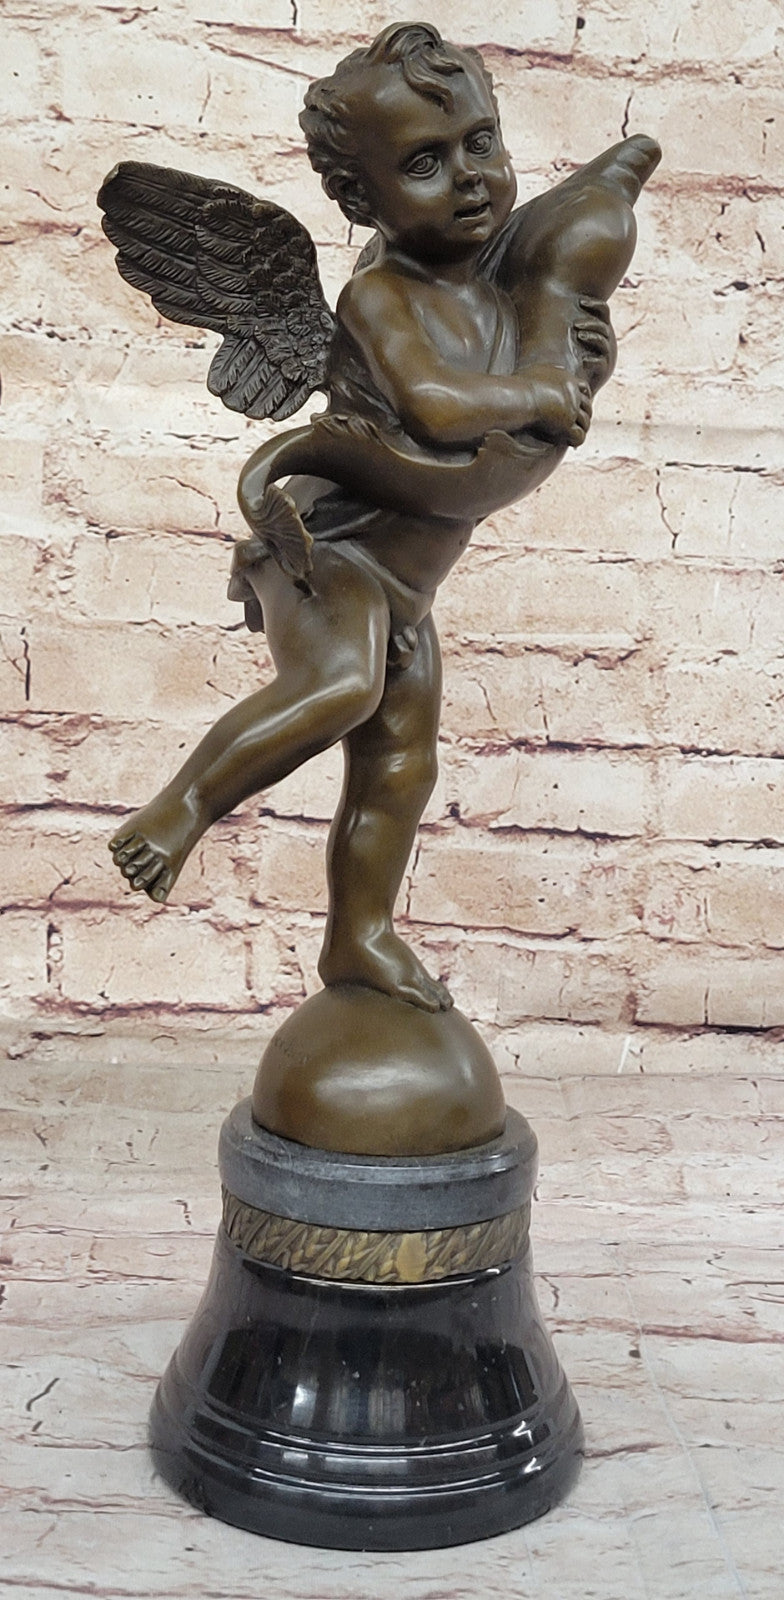 Collectible Bronze Sculpture: Artistic Semi-Nude Boy and Dolphin